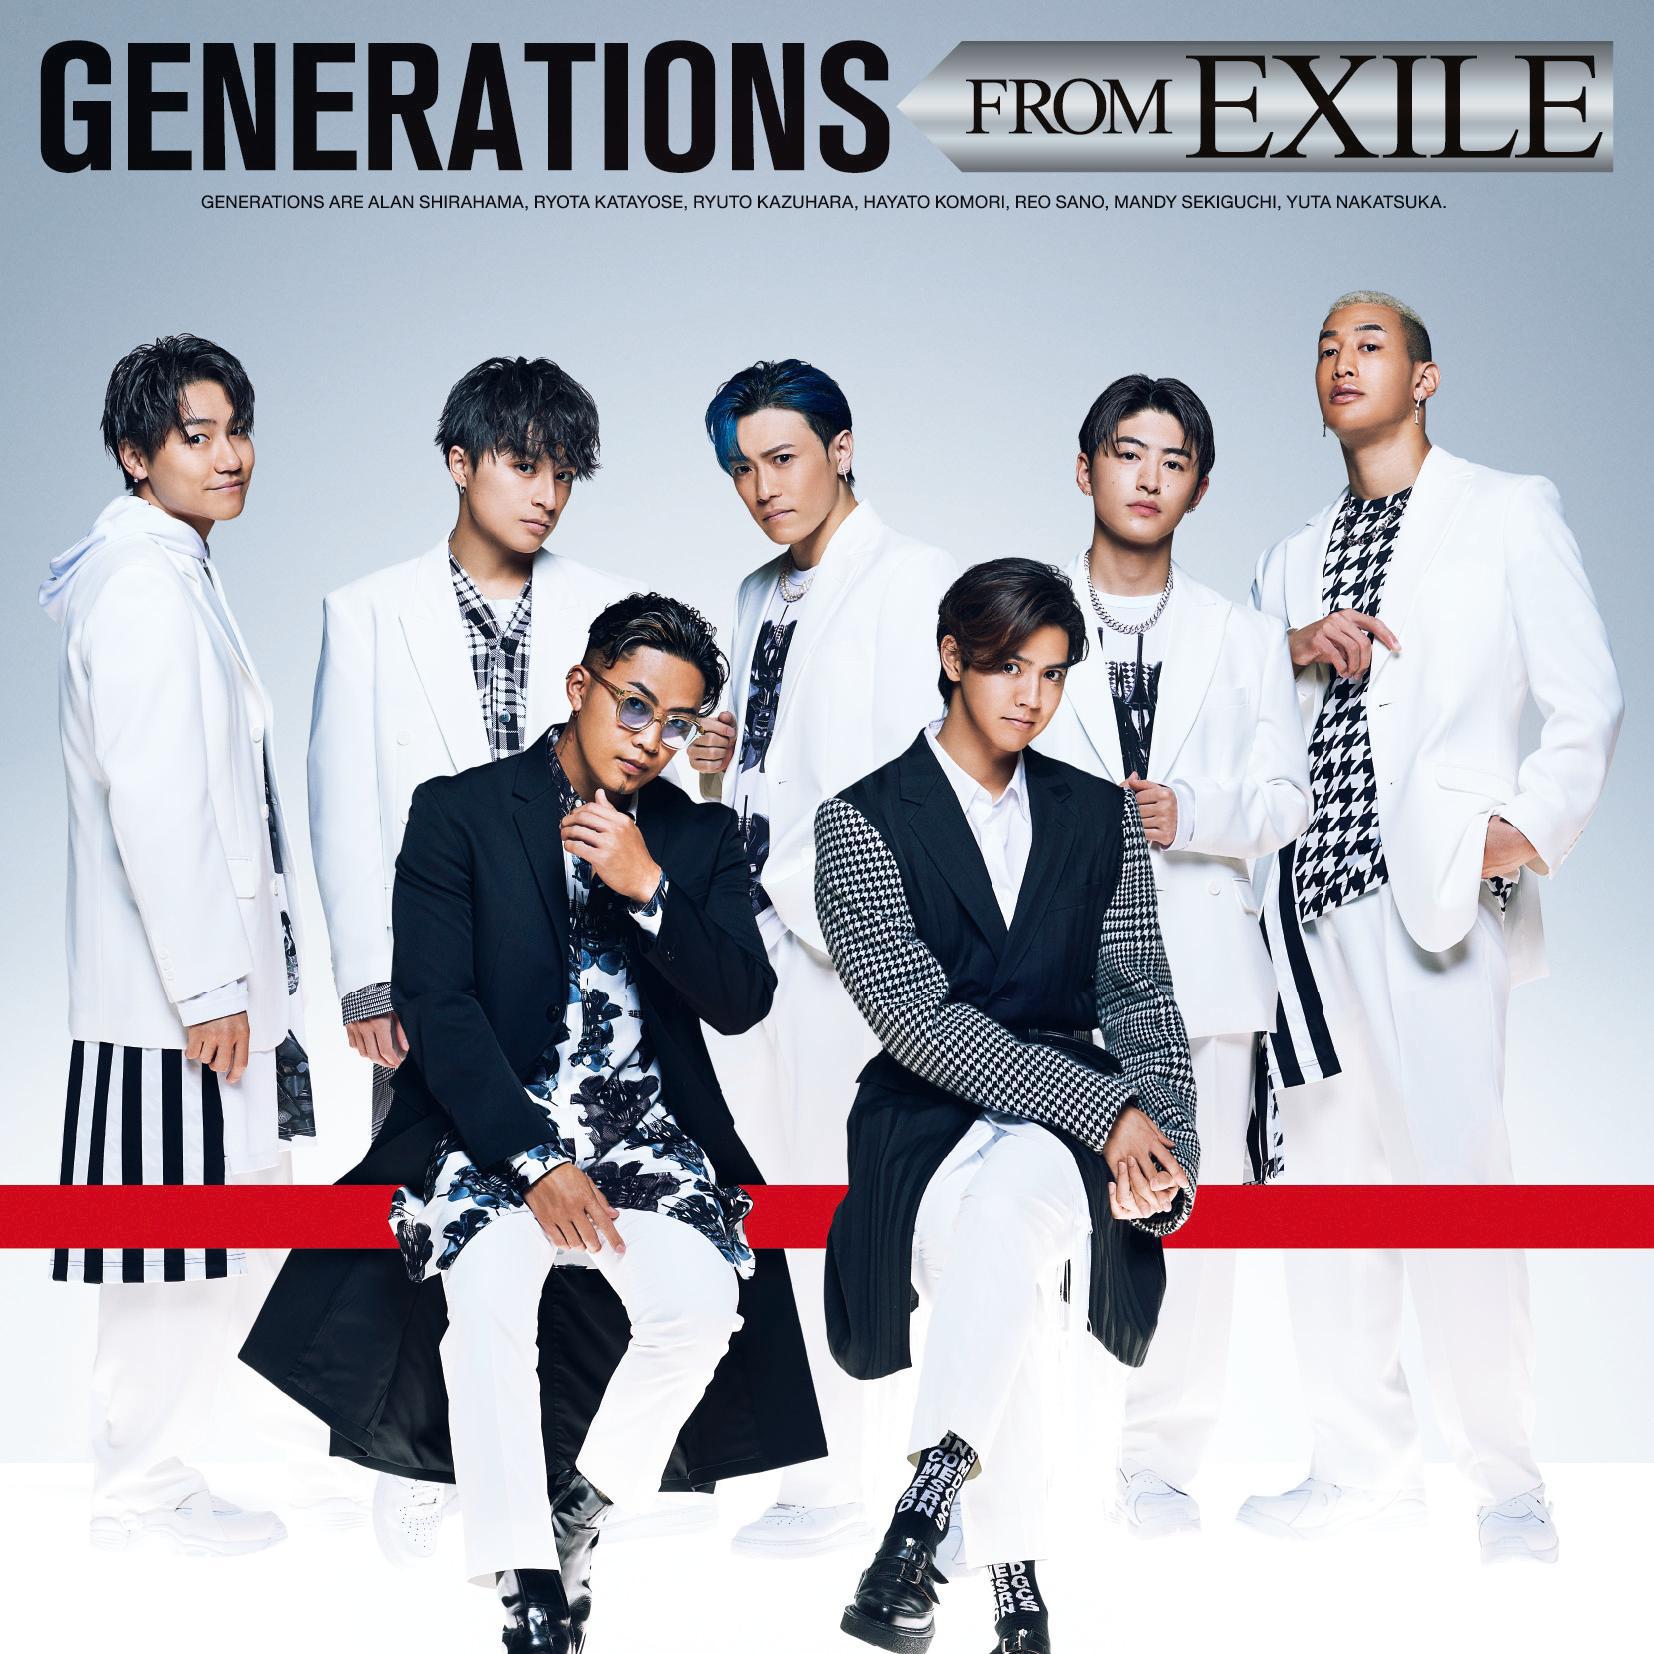 SUPER SHINE Instrumental歌词 歌手GENERATIONS from EXILE TRIBE-专辑GENERATIONS FROM EXILE-单曲《SUPER SHINE Instrumental》LRC歌词下载